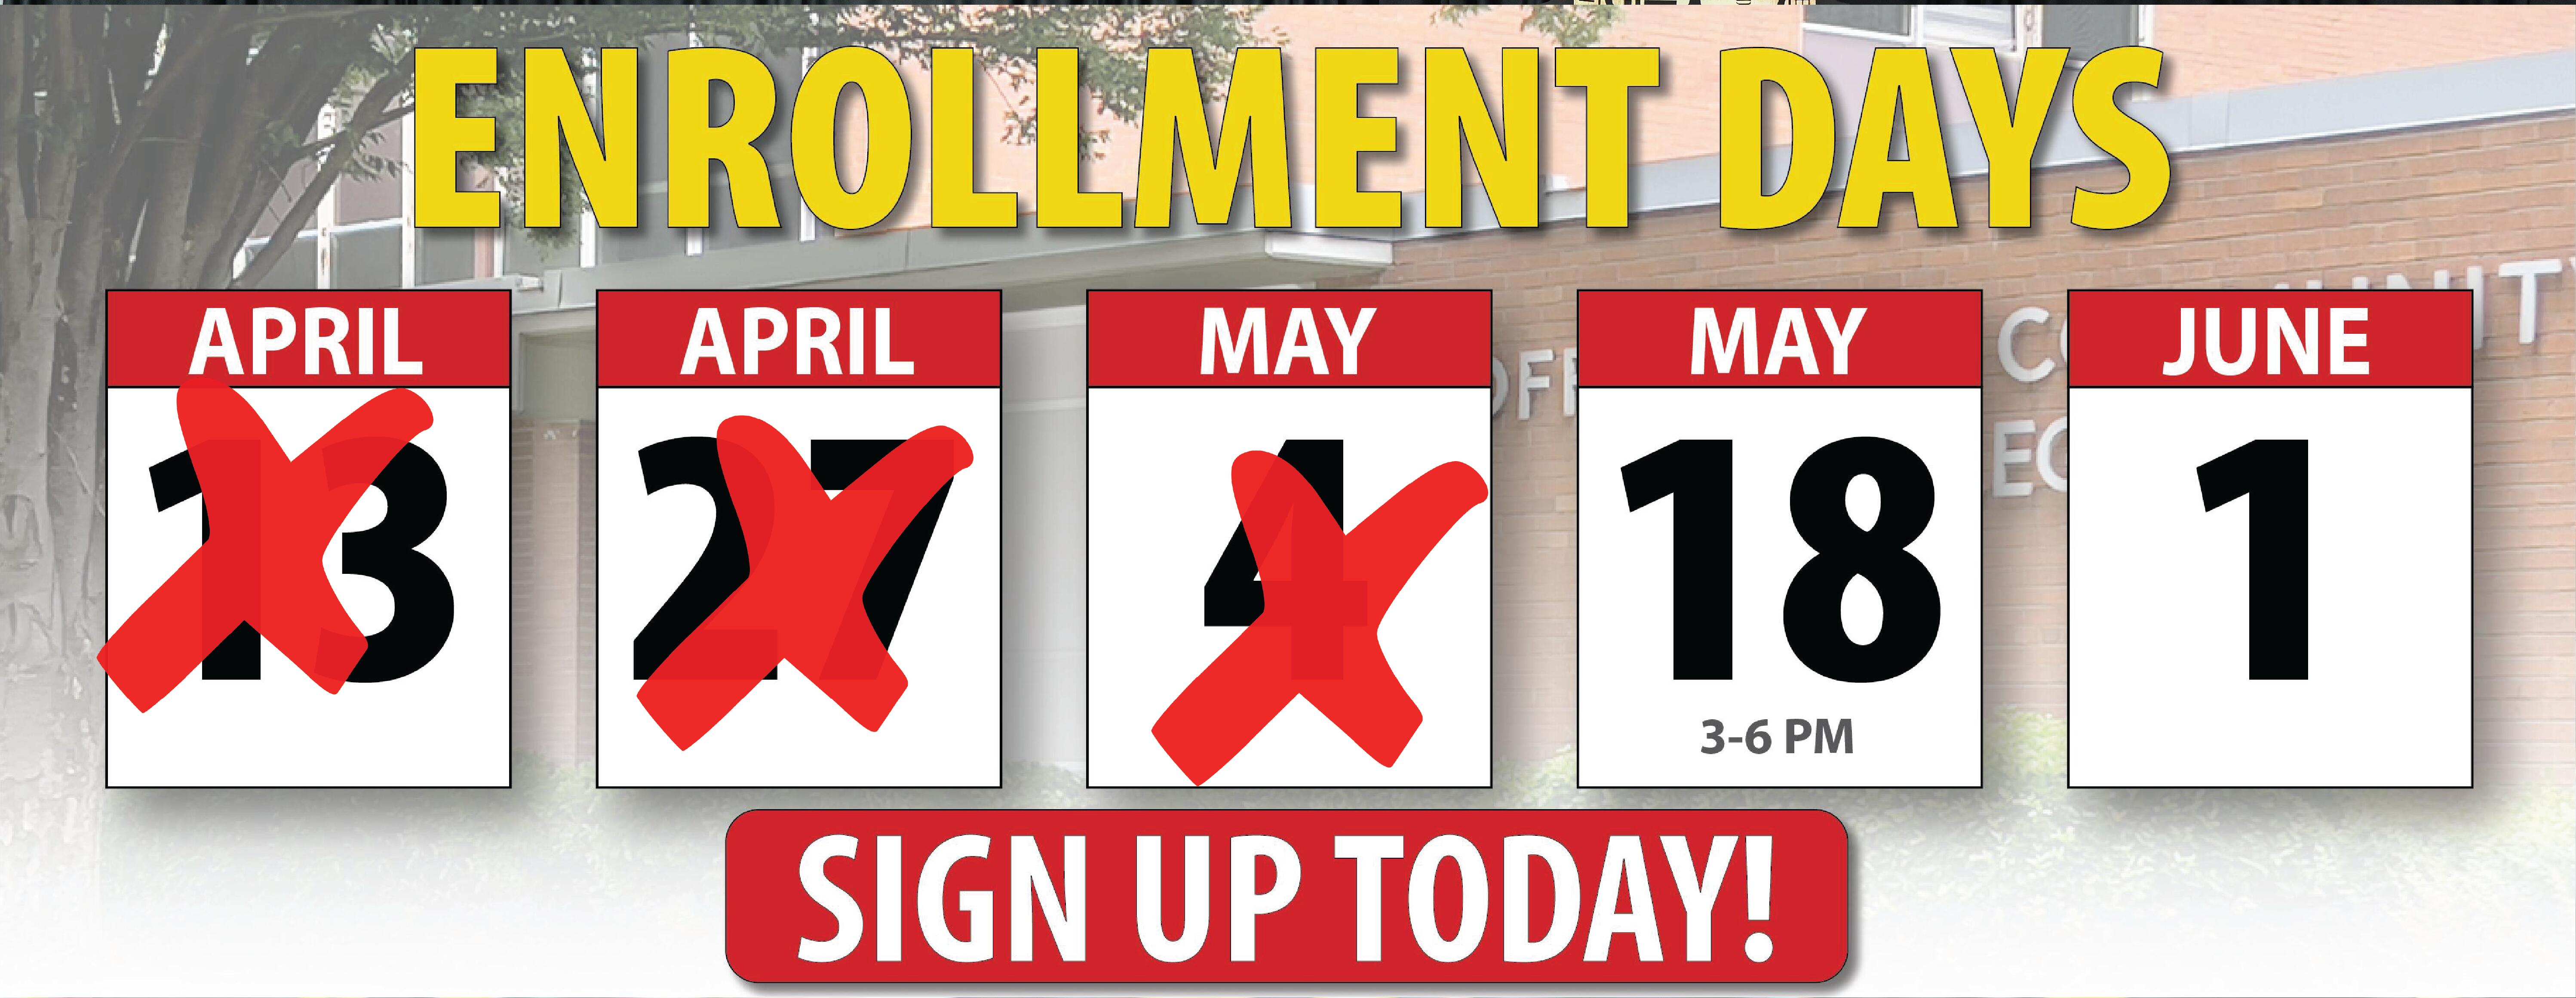 Enrollment Days April 13, 27, May 4, 18 from 3-6pm, and June 1. Sign up Today!